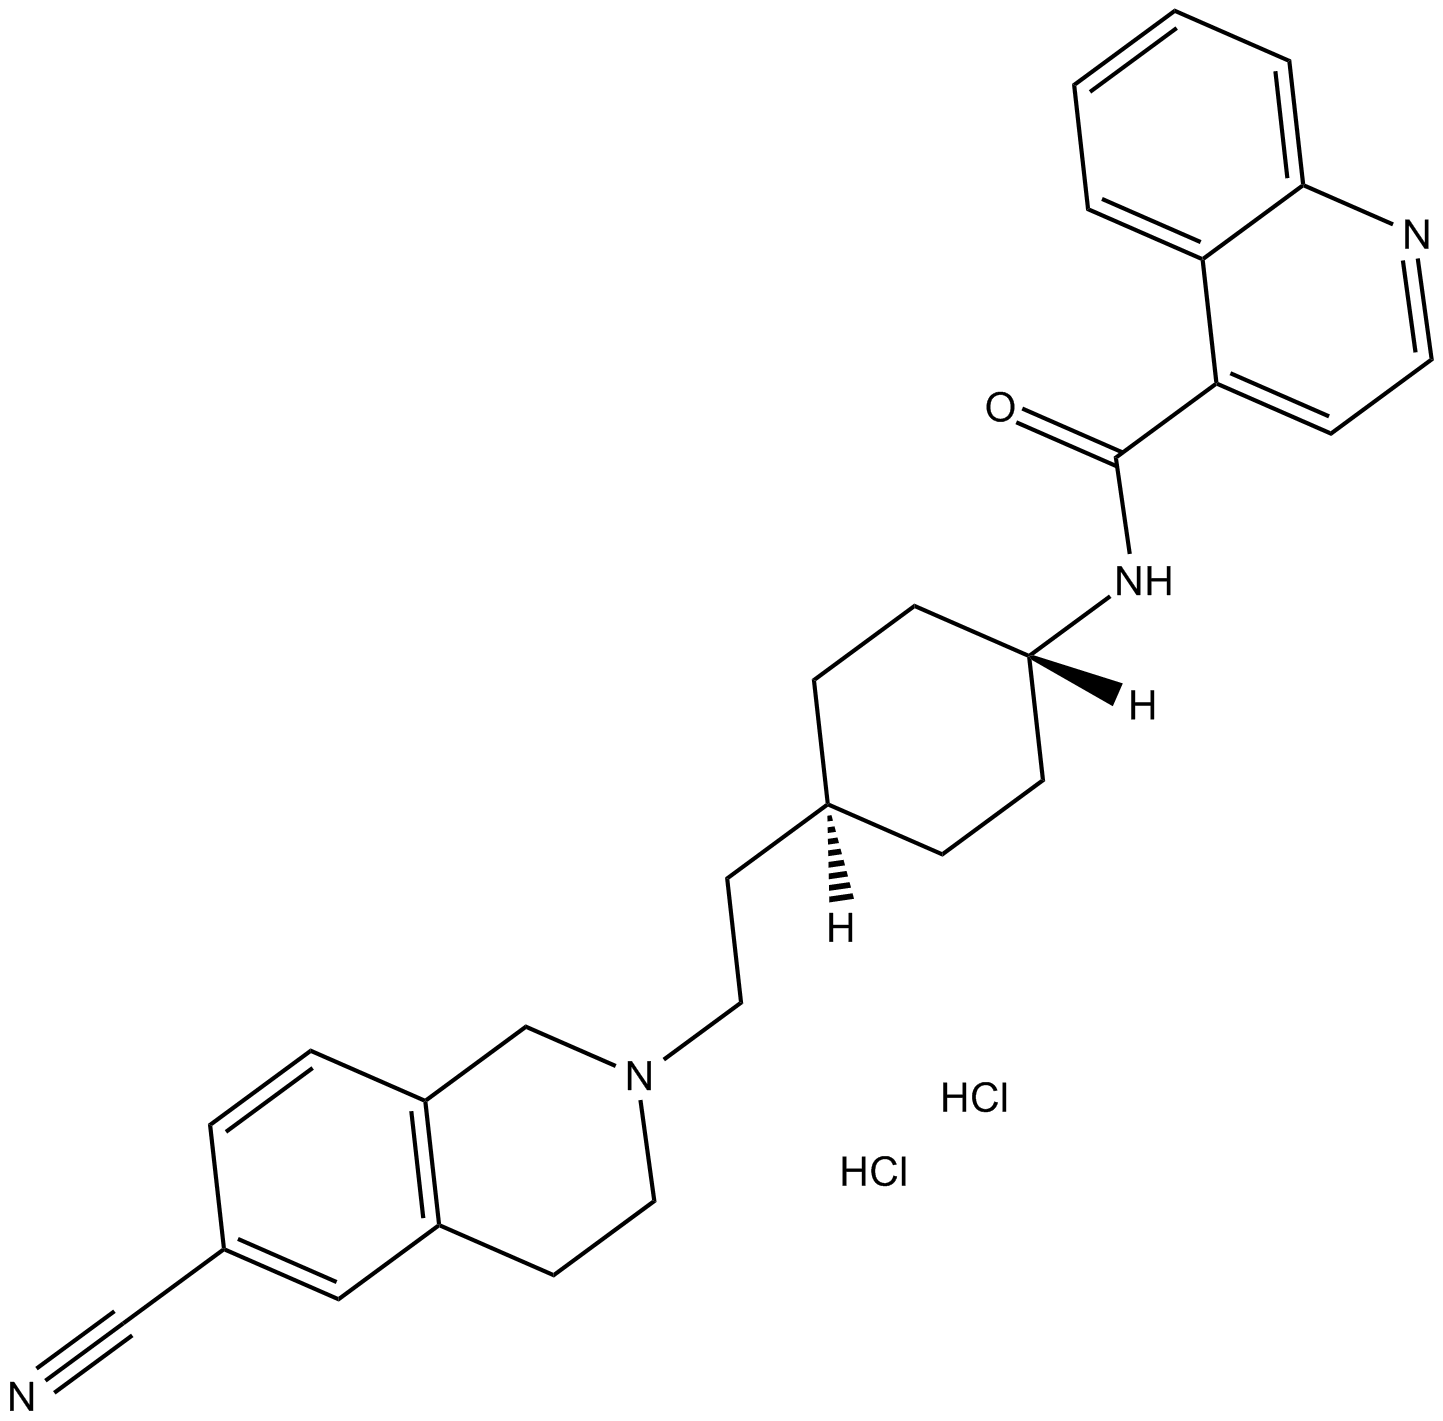 SB 277011A dihydrochloride  Chemical Structure